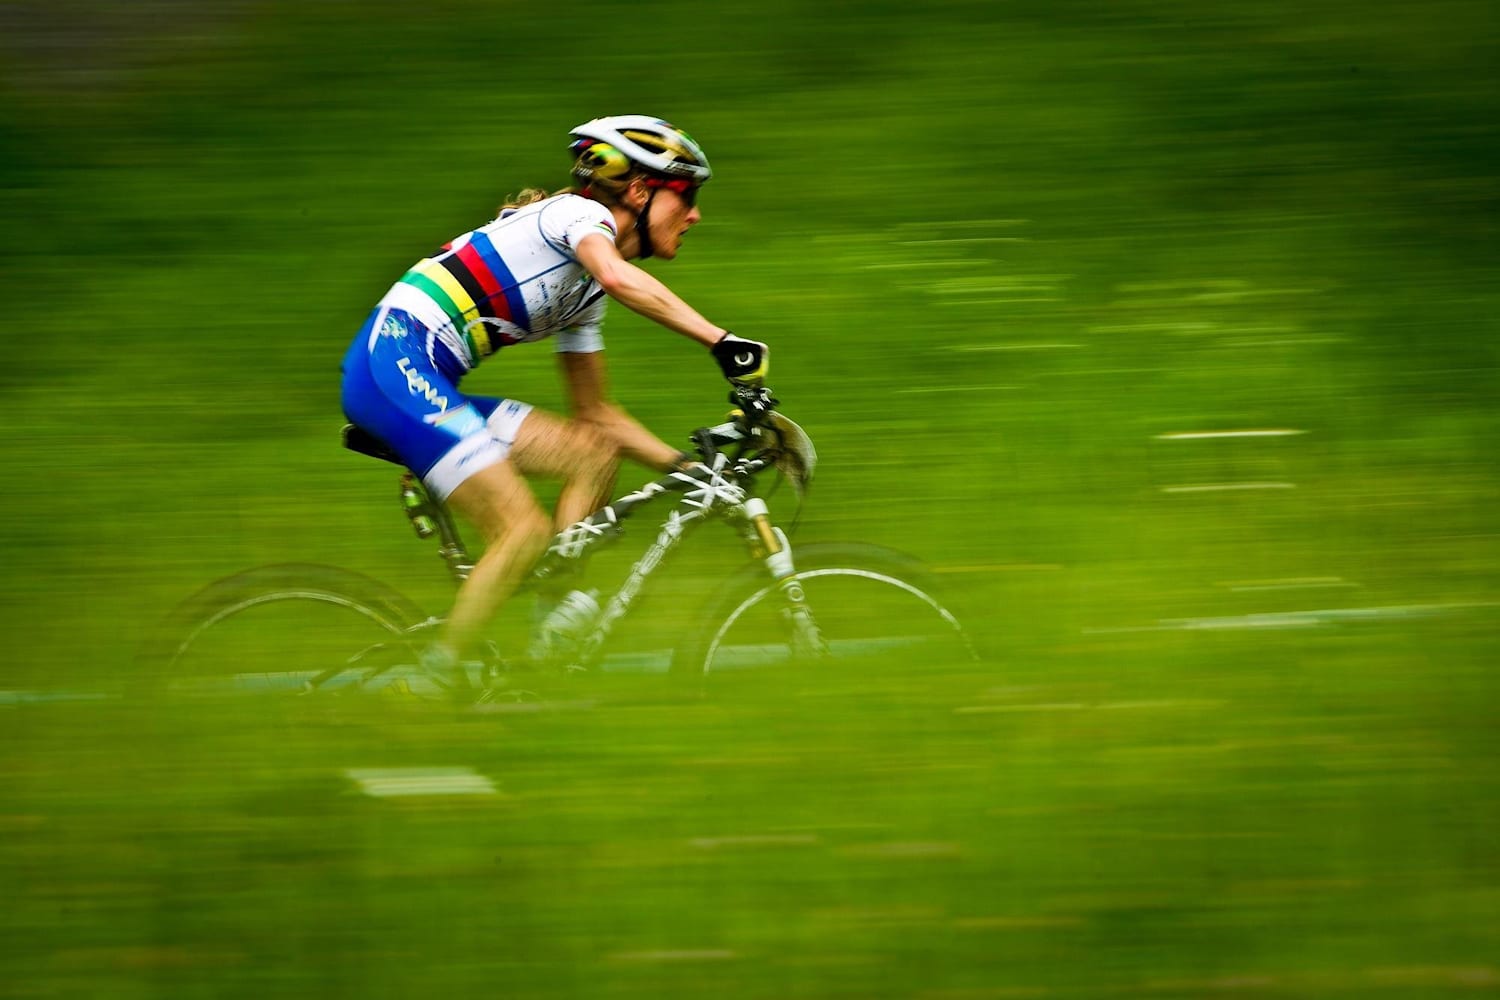 Types of MTB: Discover the variety of mountain biking